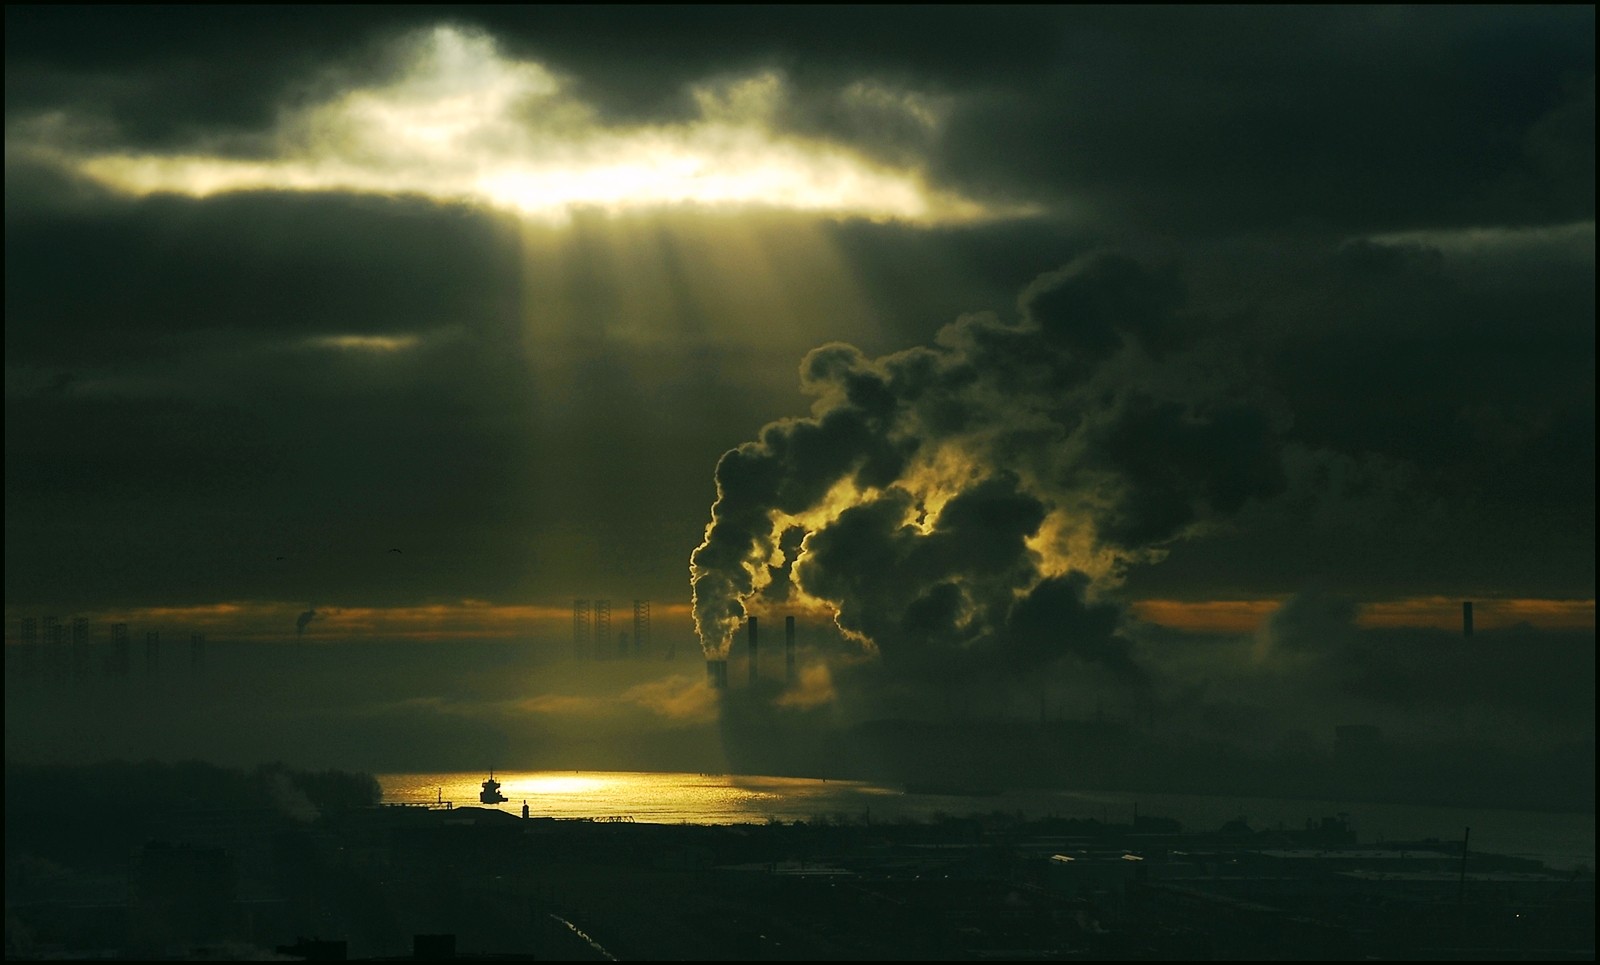 Smoke Netherlands Sunbeams Clouds River Smog City Landscape Pollution Without People 1600x965